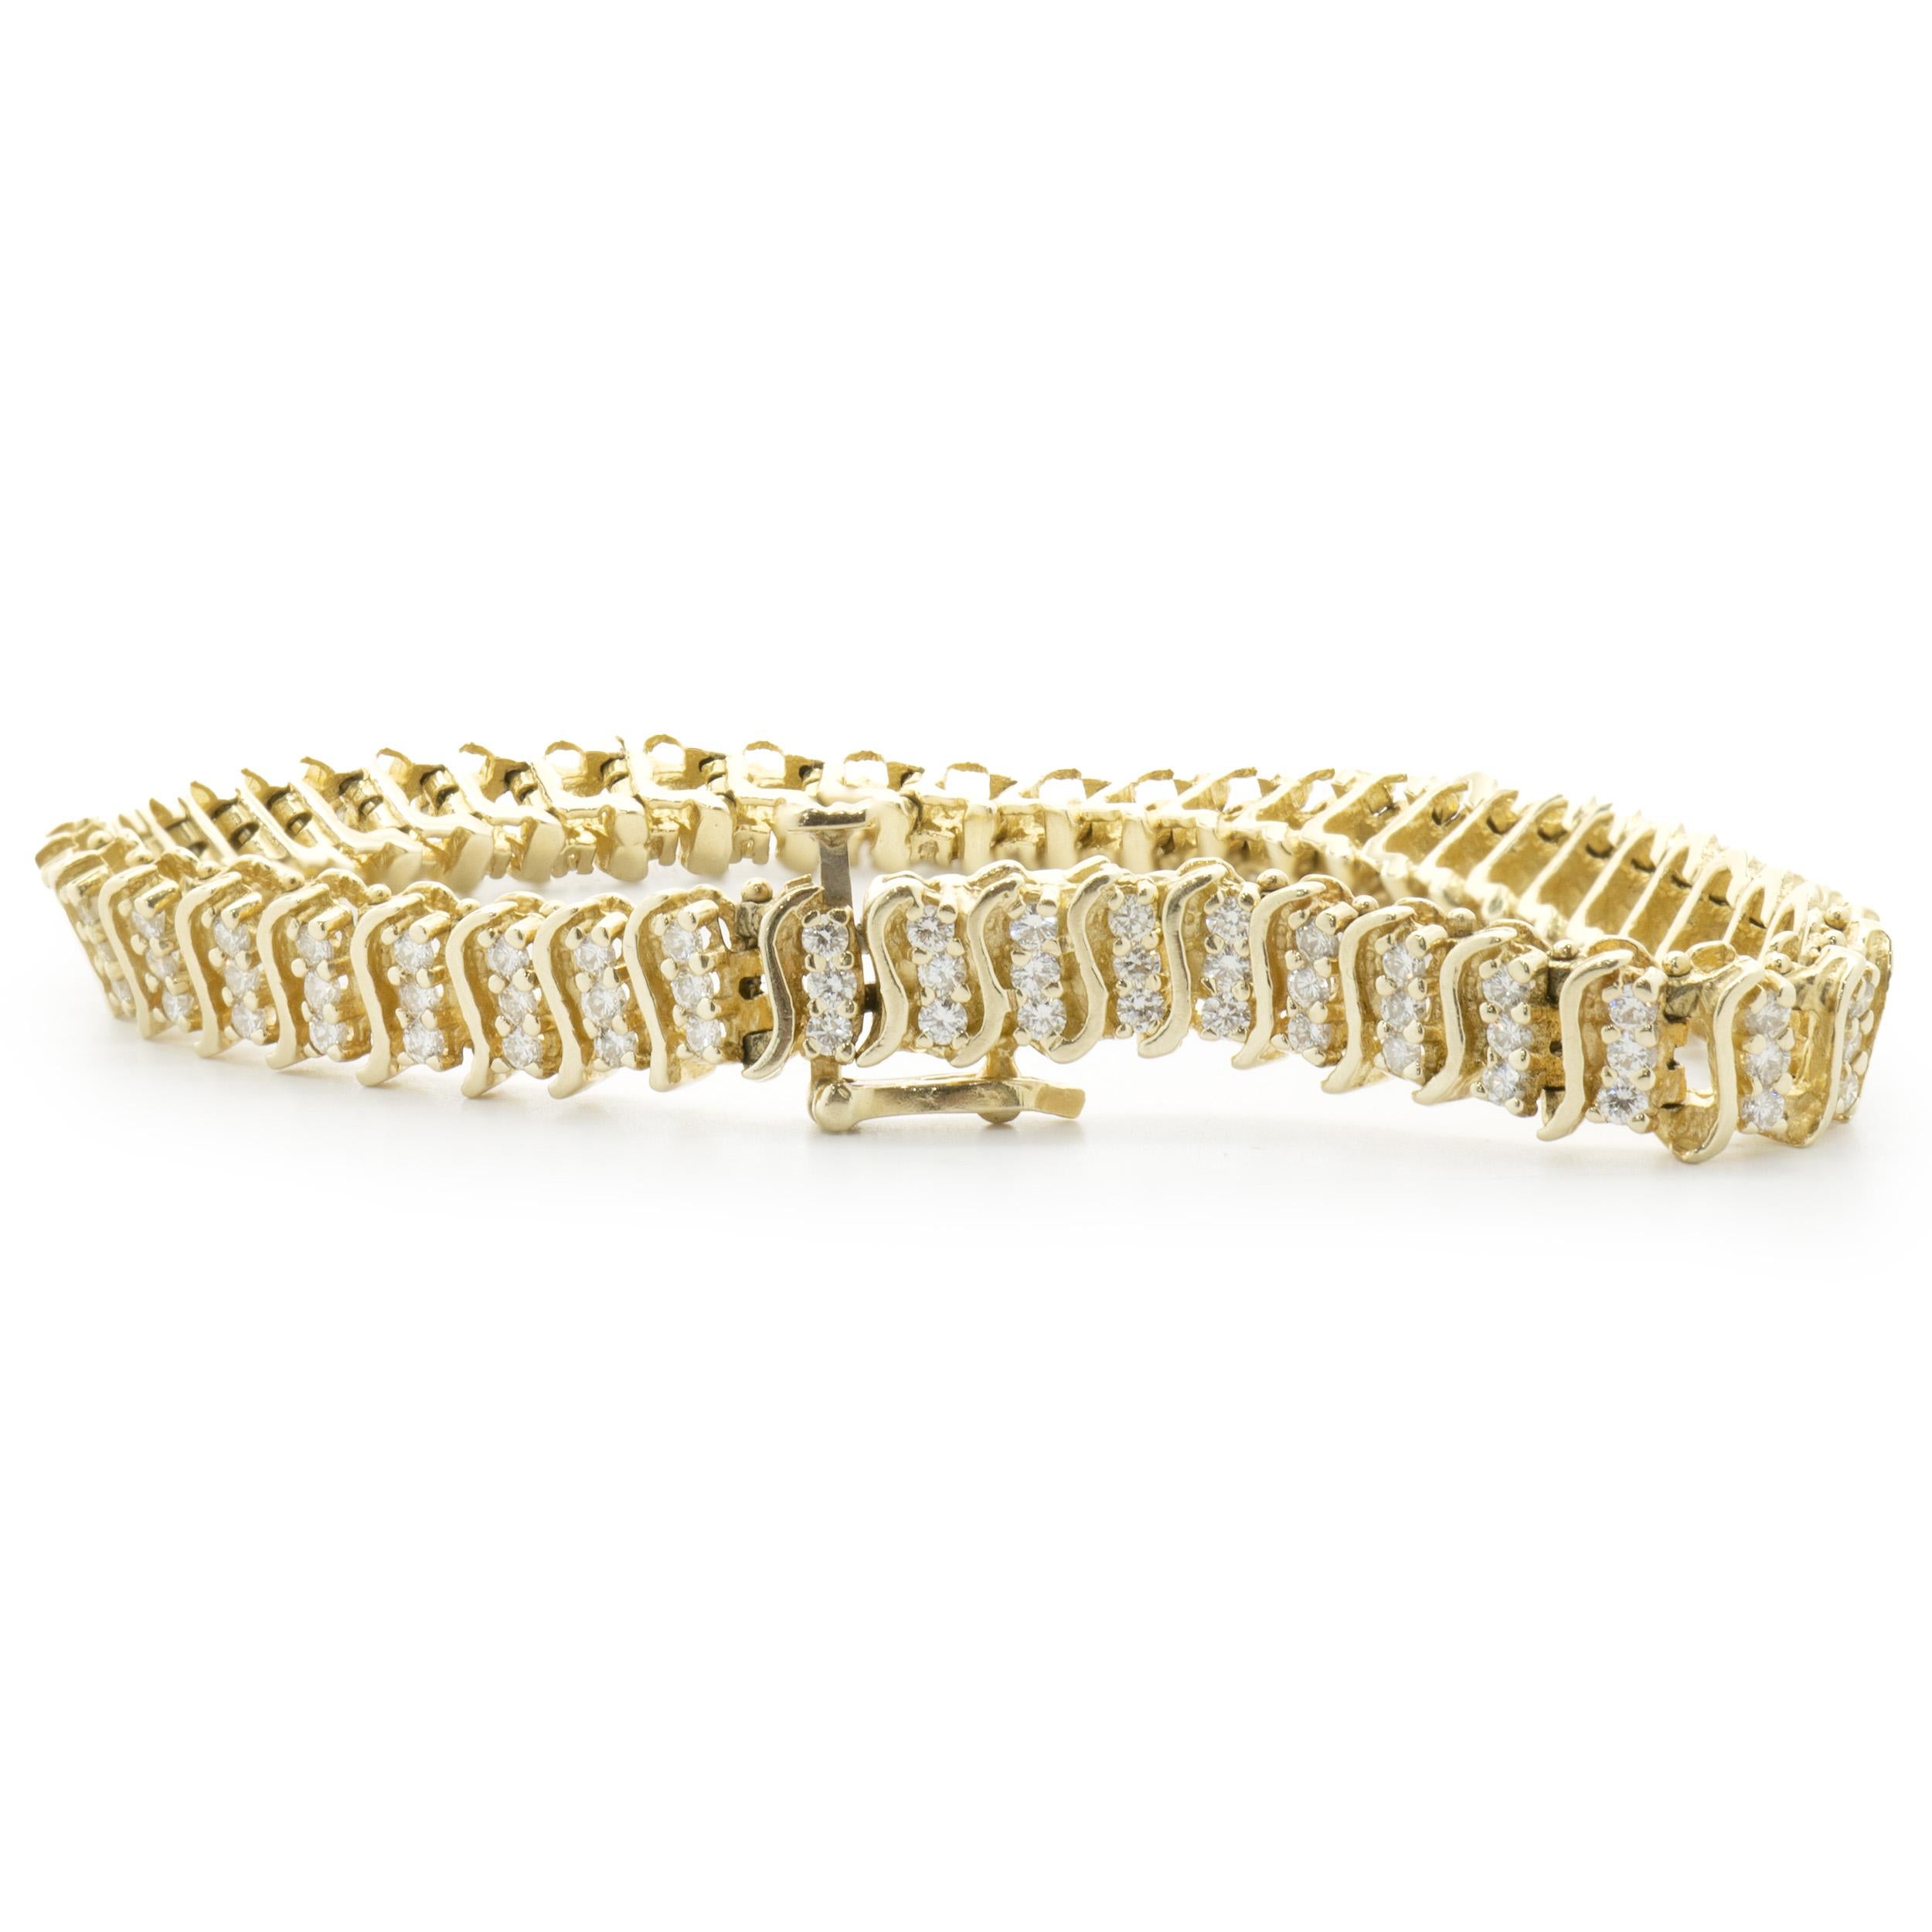 Designer: custom design
Material: 14K yellow gold
Diamond: 141 round brilliant cut = 2.82cttw
Color: H
Clarity: SI1
Dimensions: bracelet will fit up to a 7-inch wrist
Weight: 16.42 grams